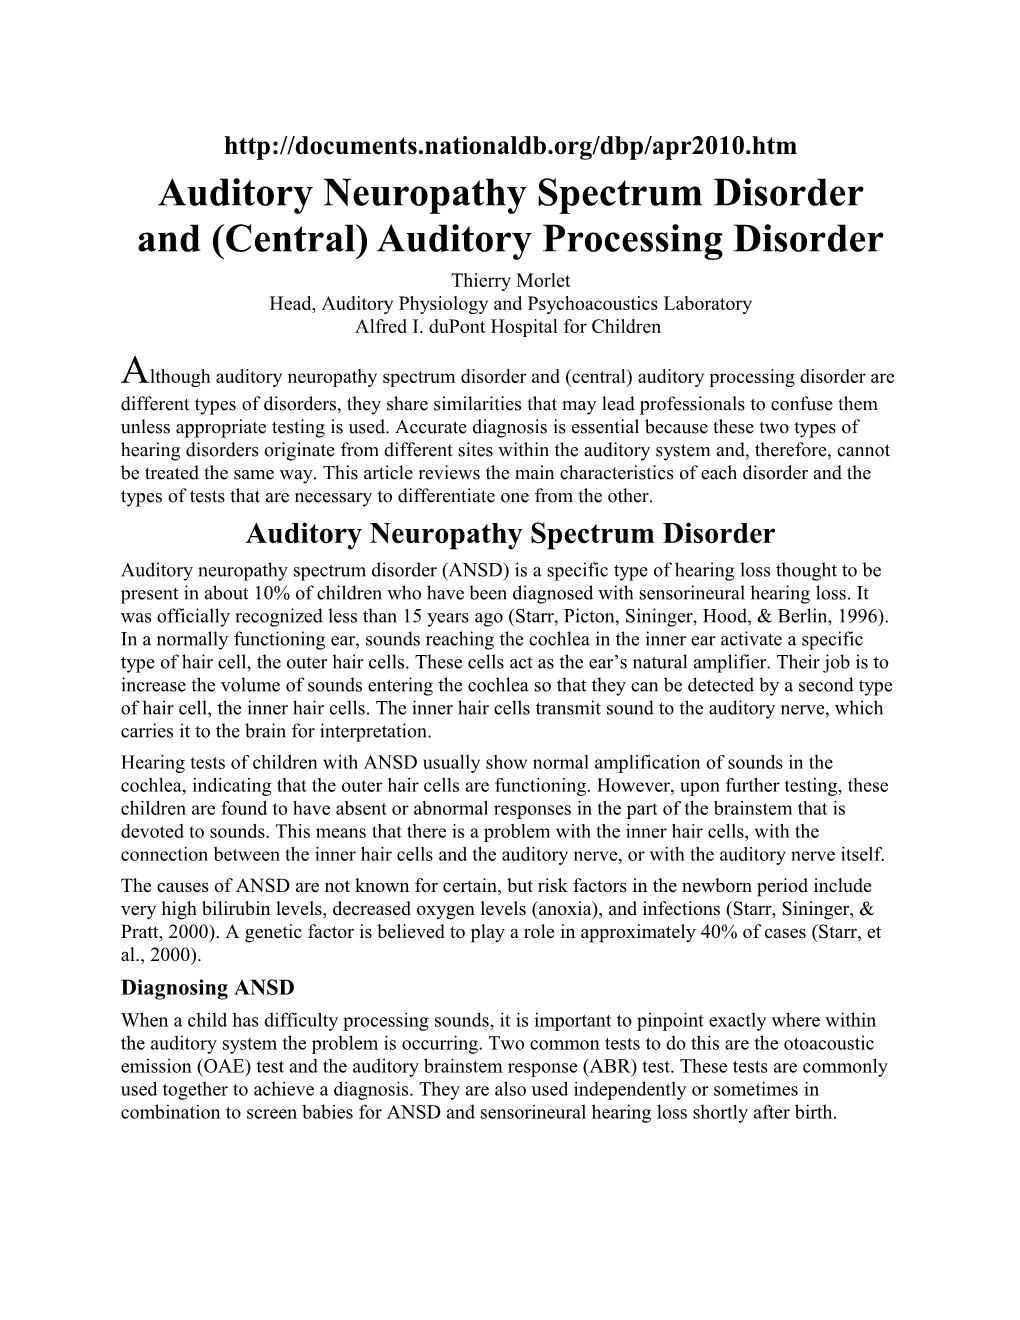 Auditory Neuropathy Spectrum Disorder and (Central) Auditory Processing Disorder